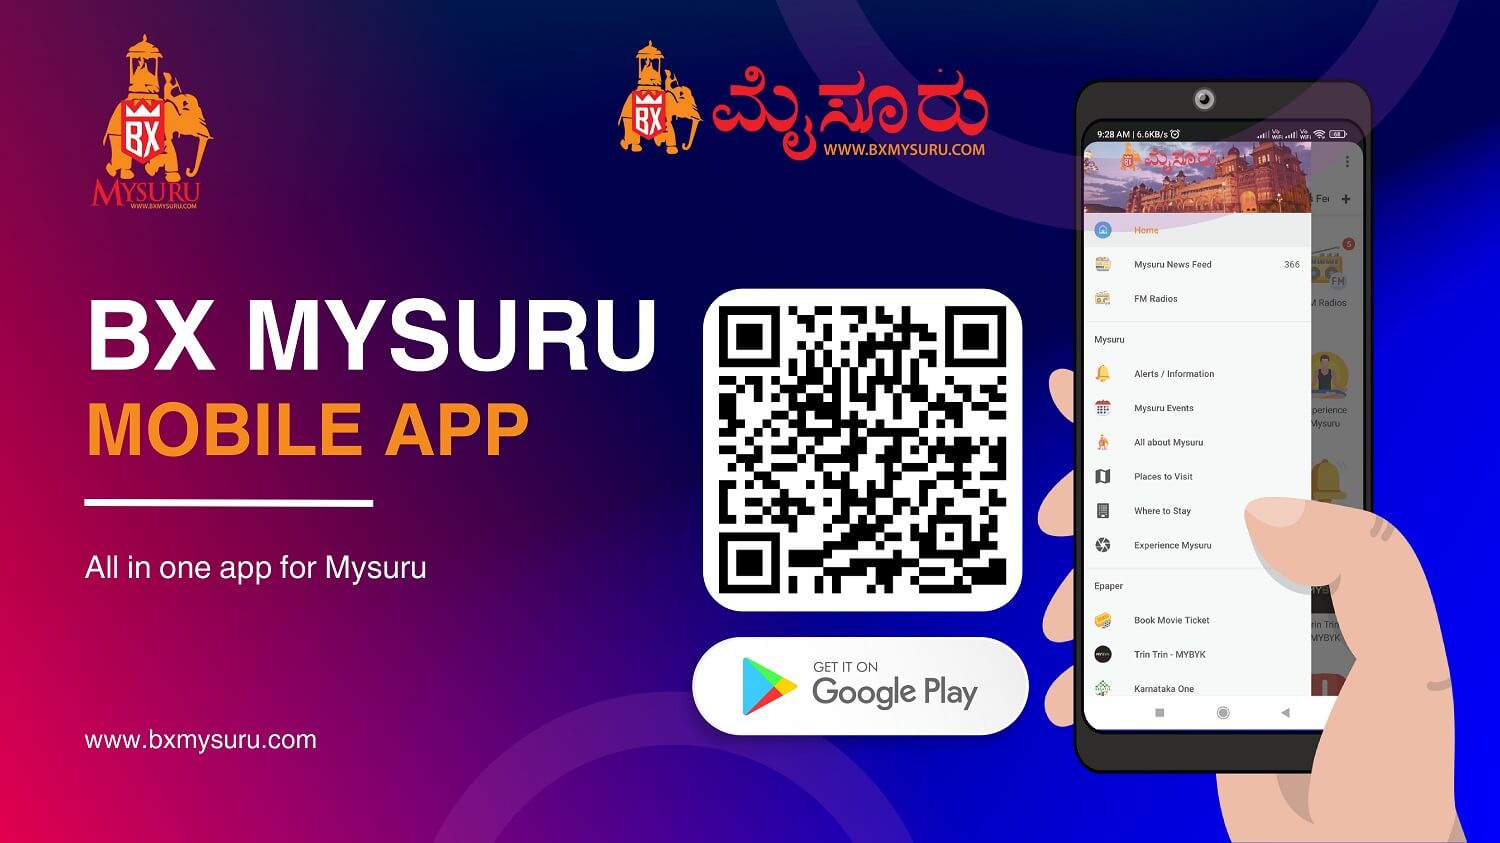 New Mobile App ‘Bx Mysuru’ Launches Today: A One-Stop Solution for Mysuru News and Entertainment